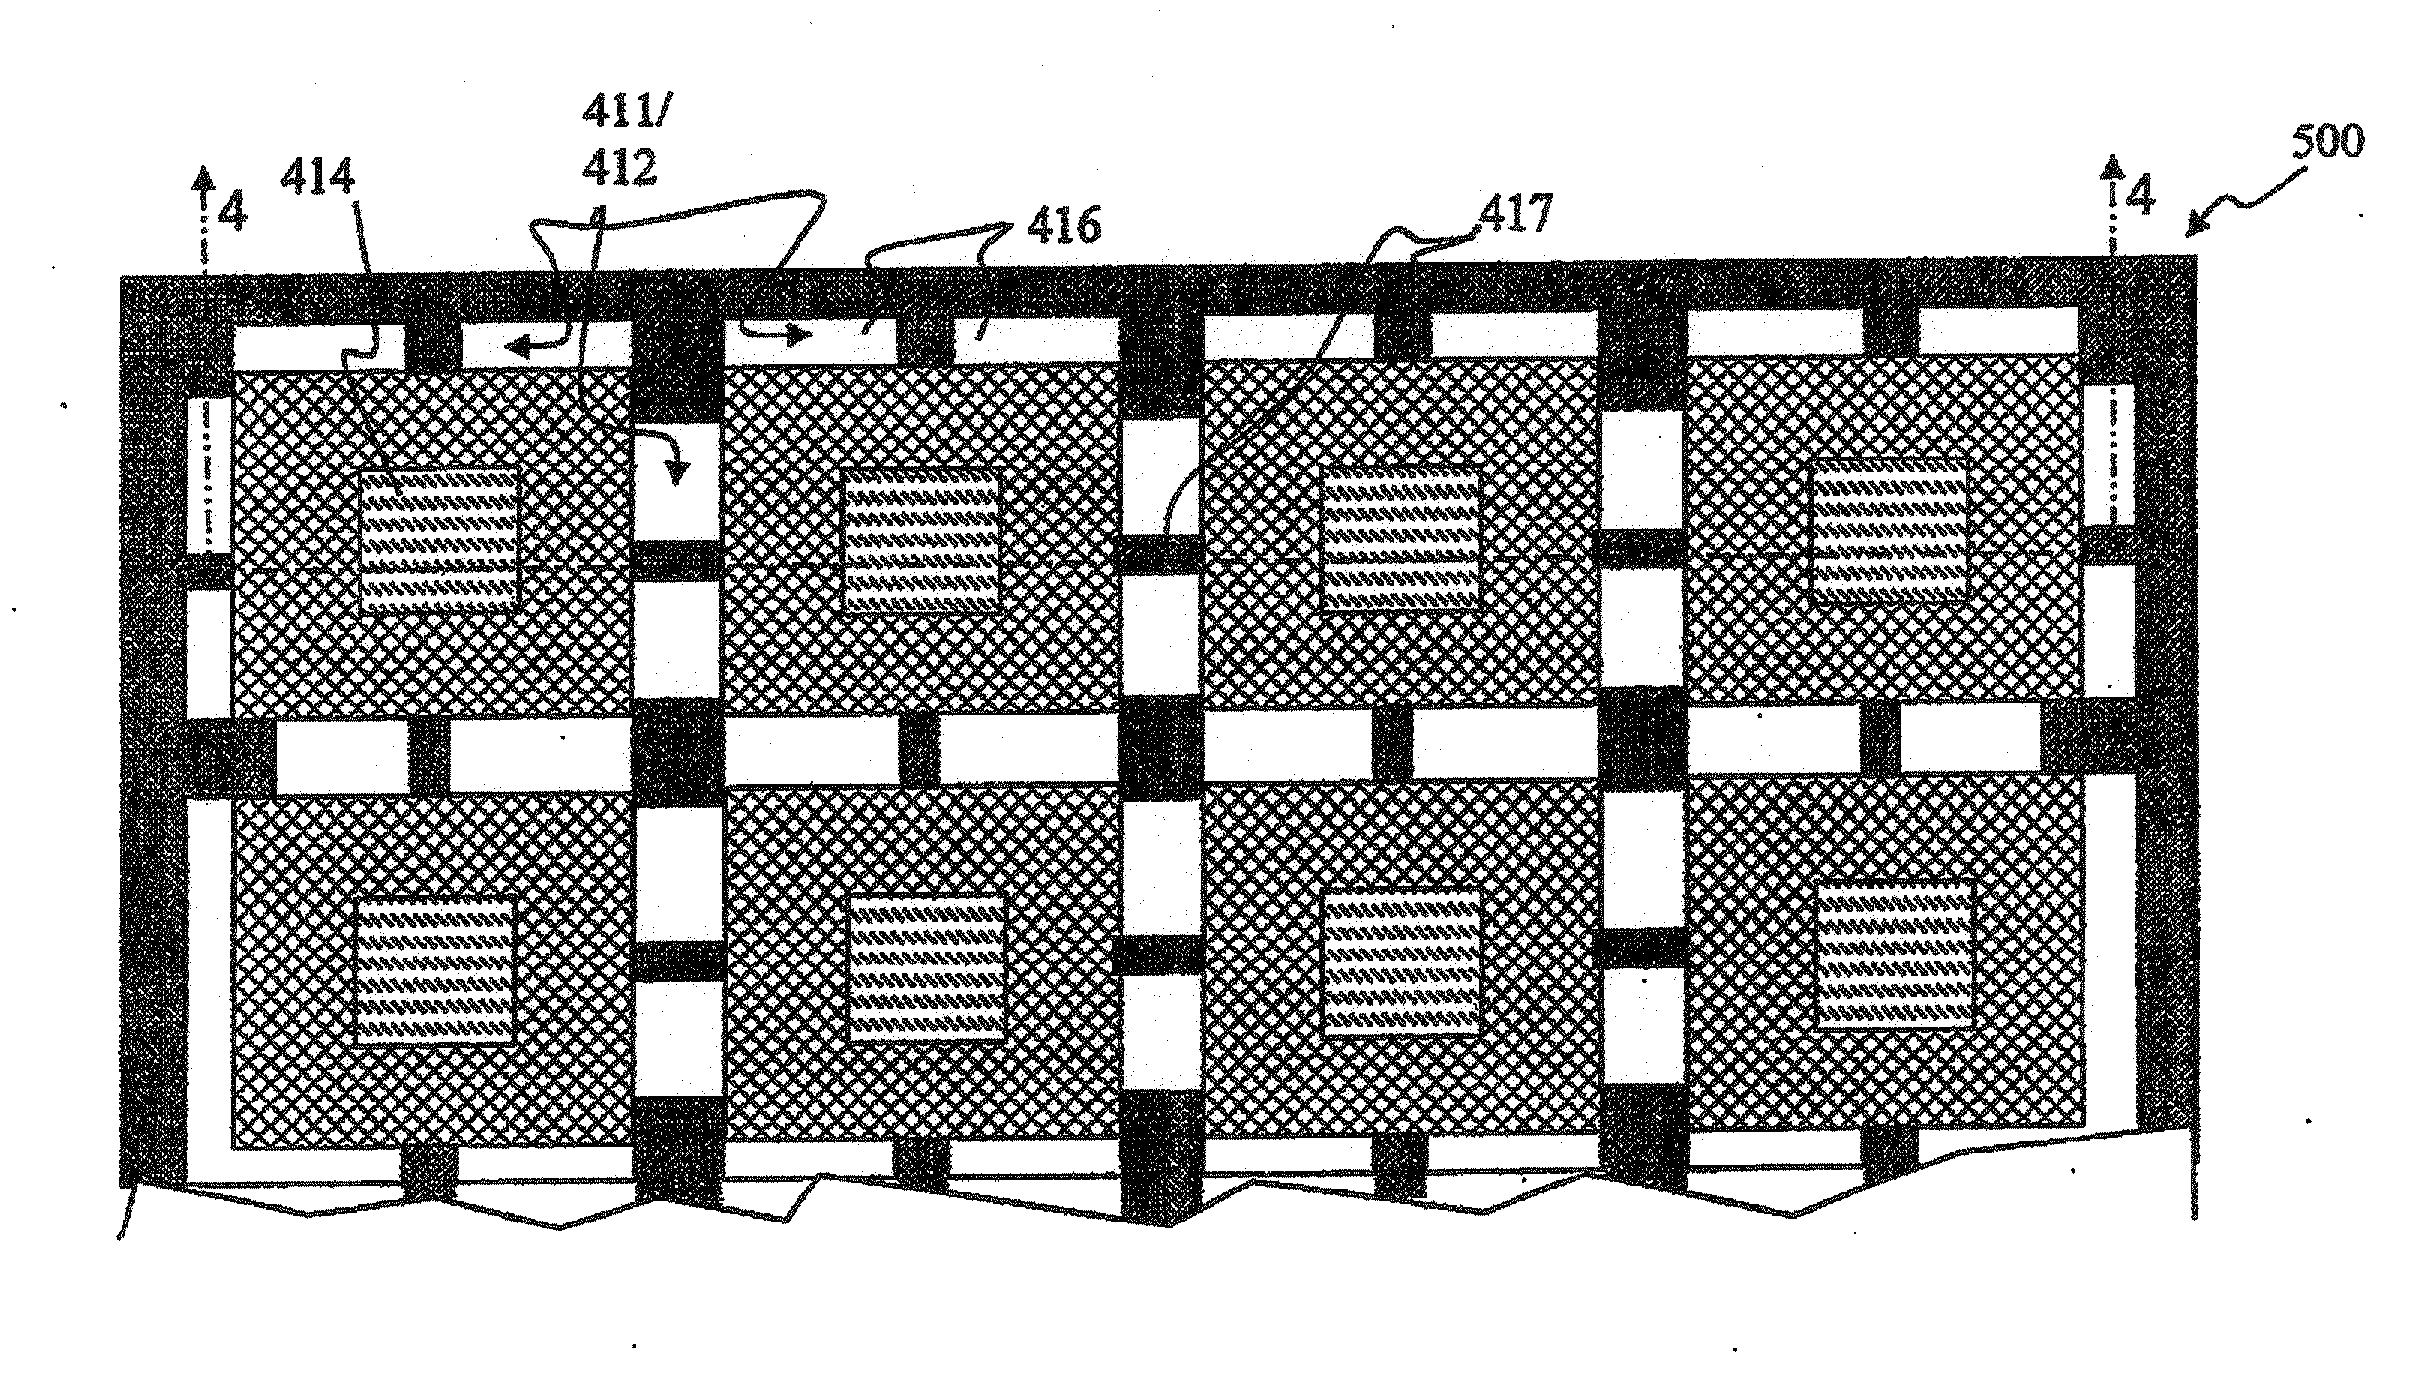 Method and apparatus for solid-state microbattery photolithographic manufacture, singulation and passivation